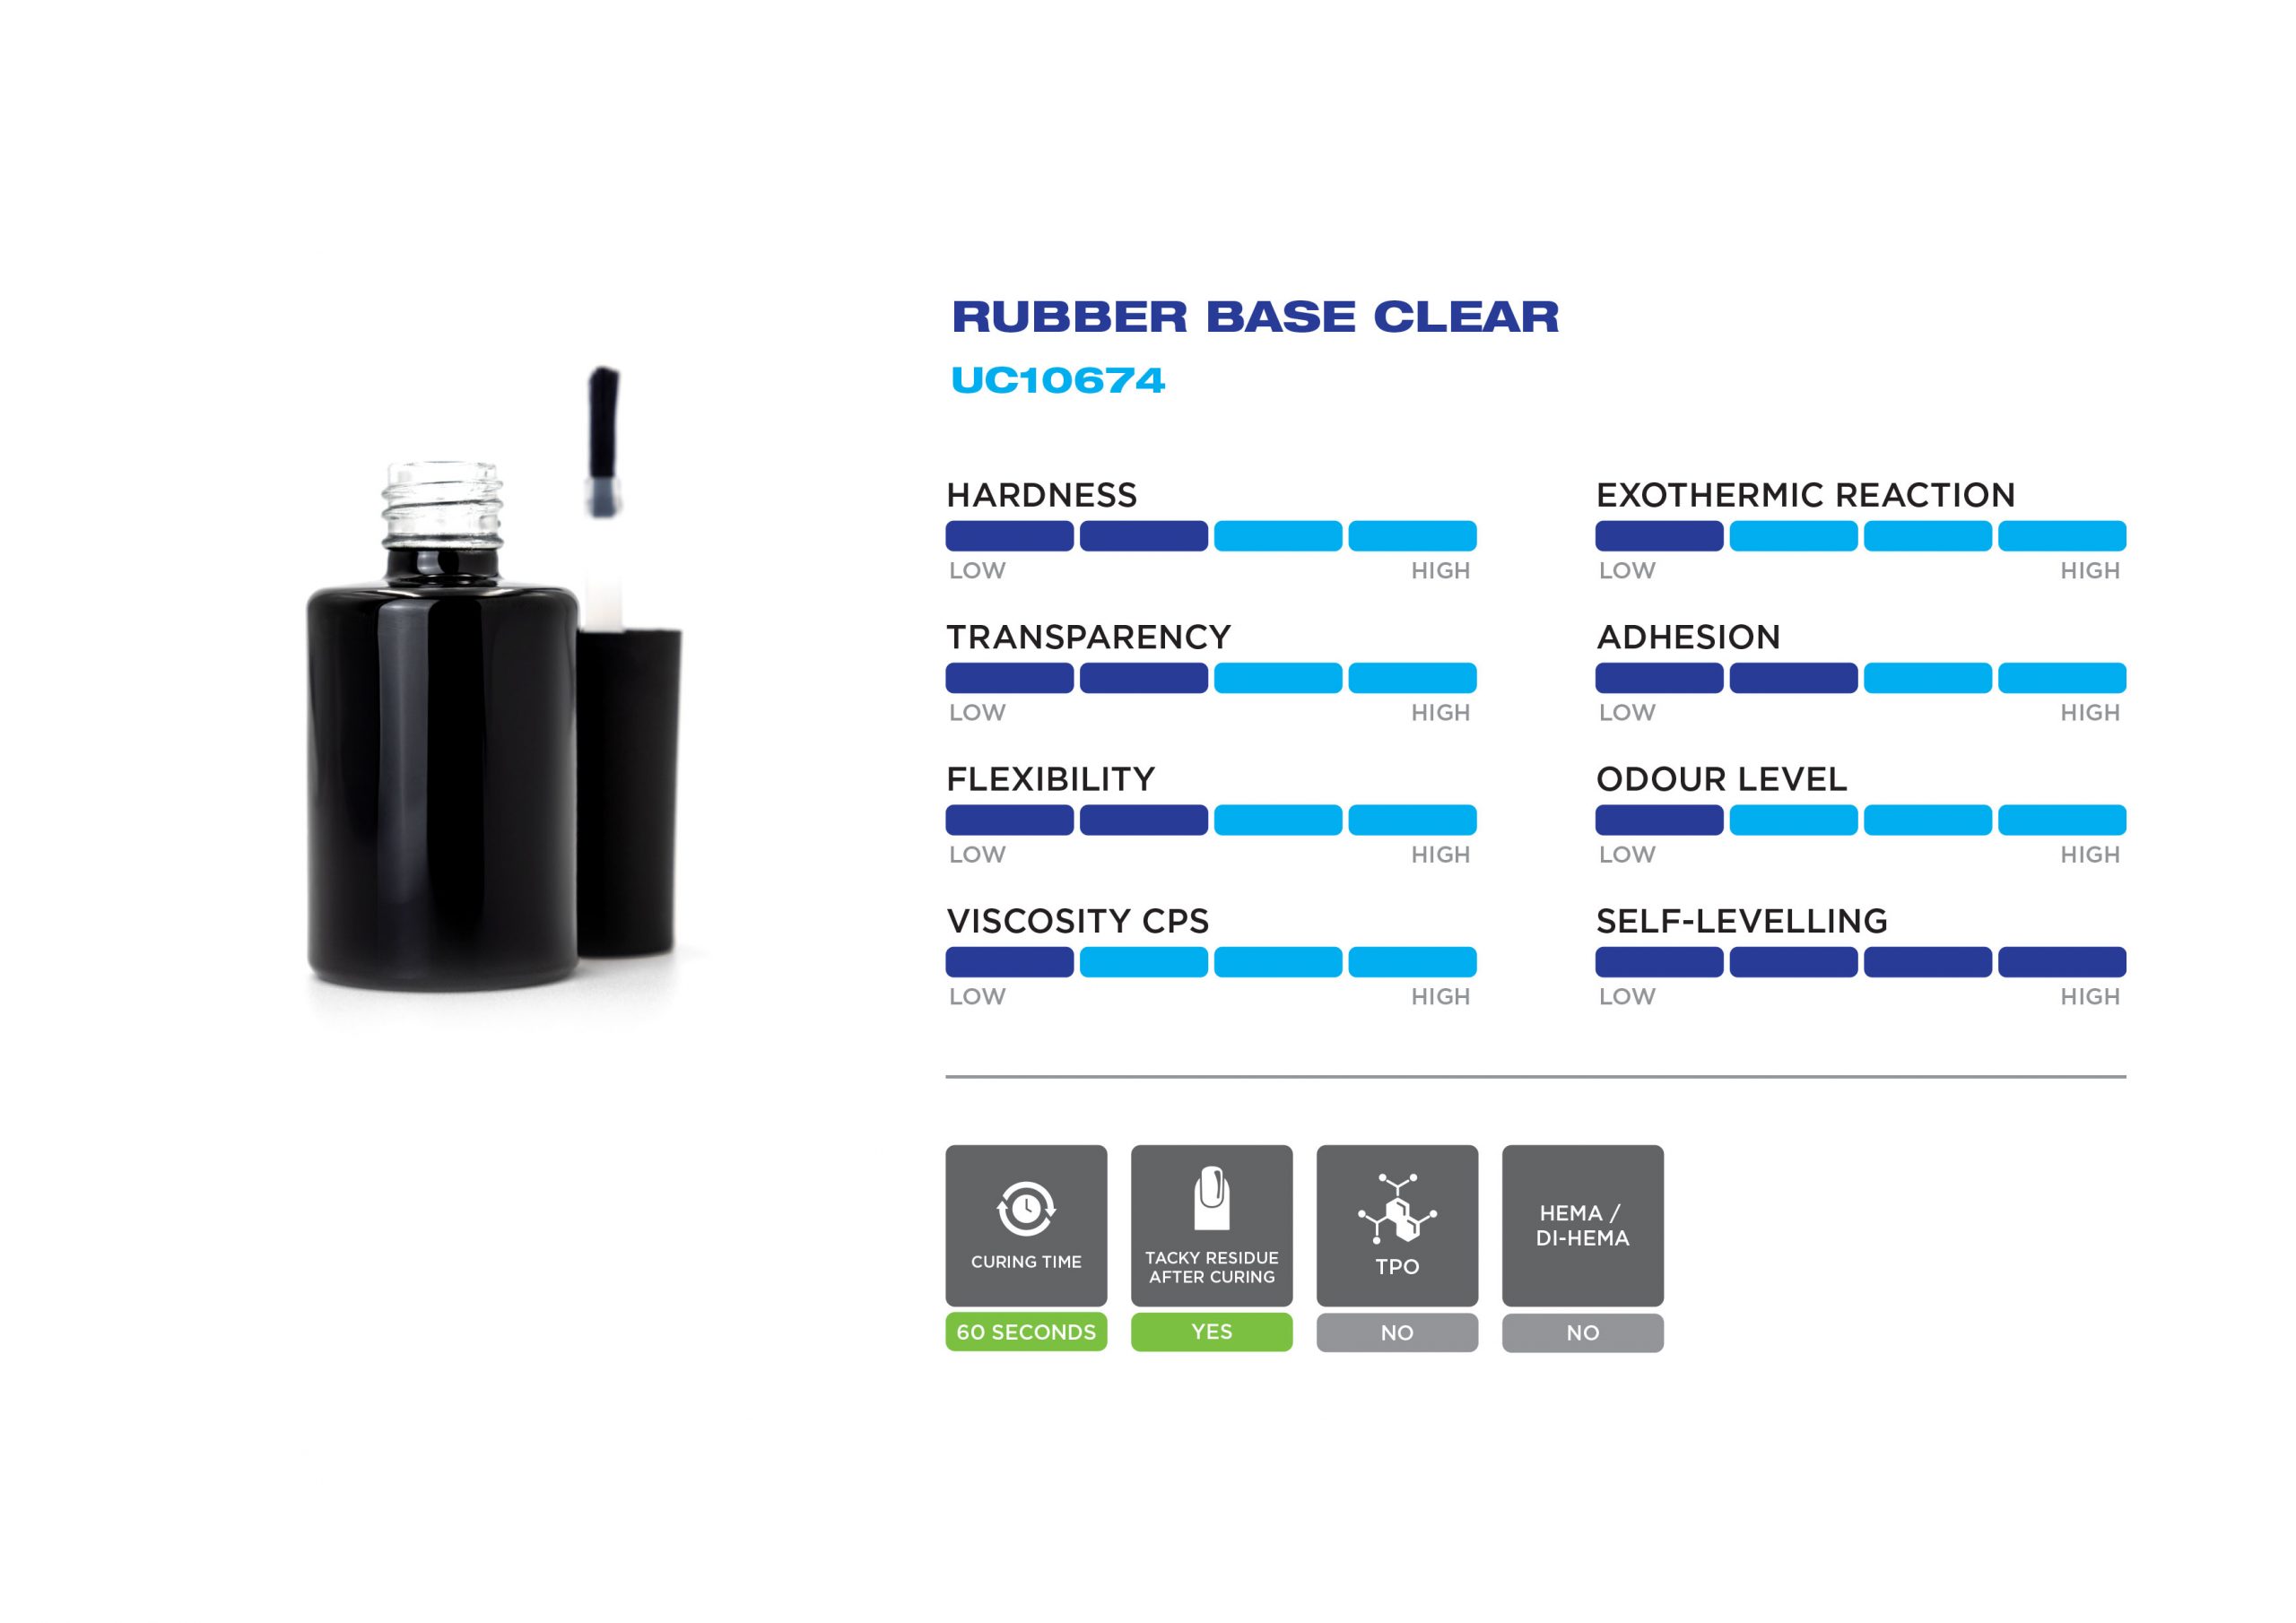 UC10674-Rubber-Base-Clear